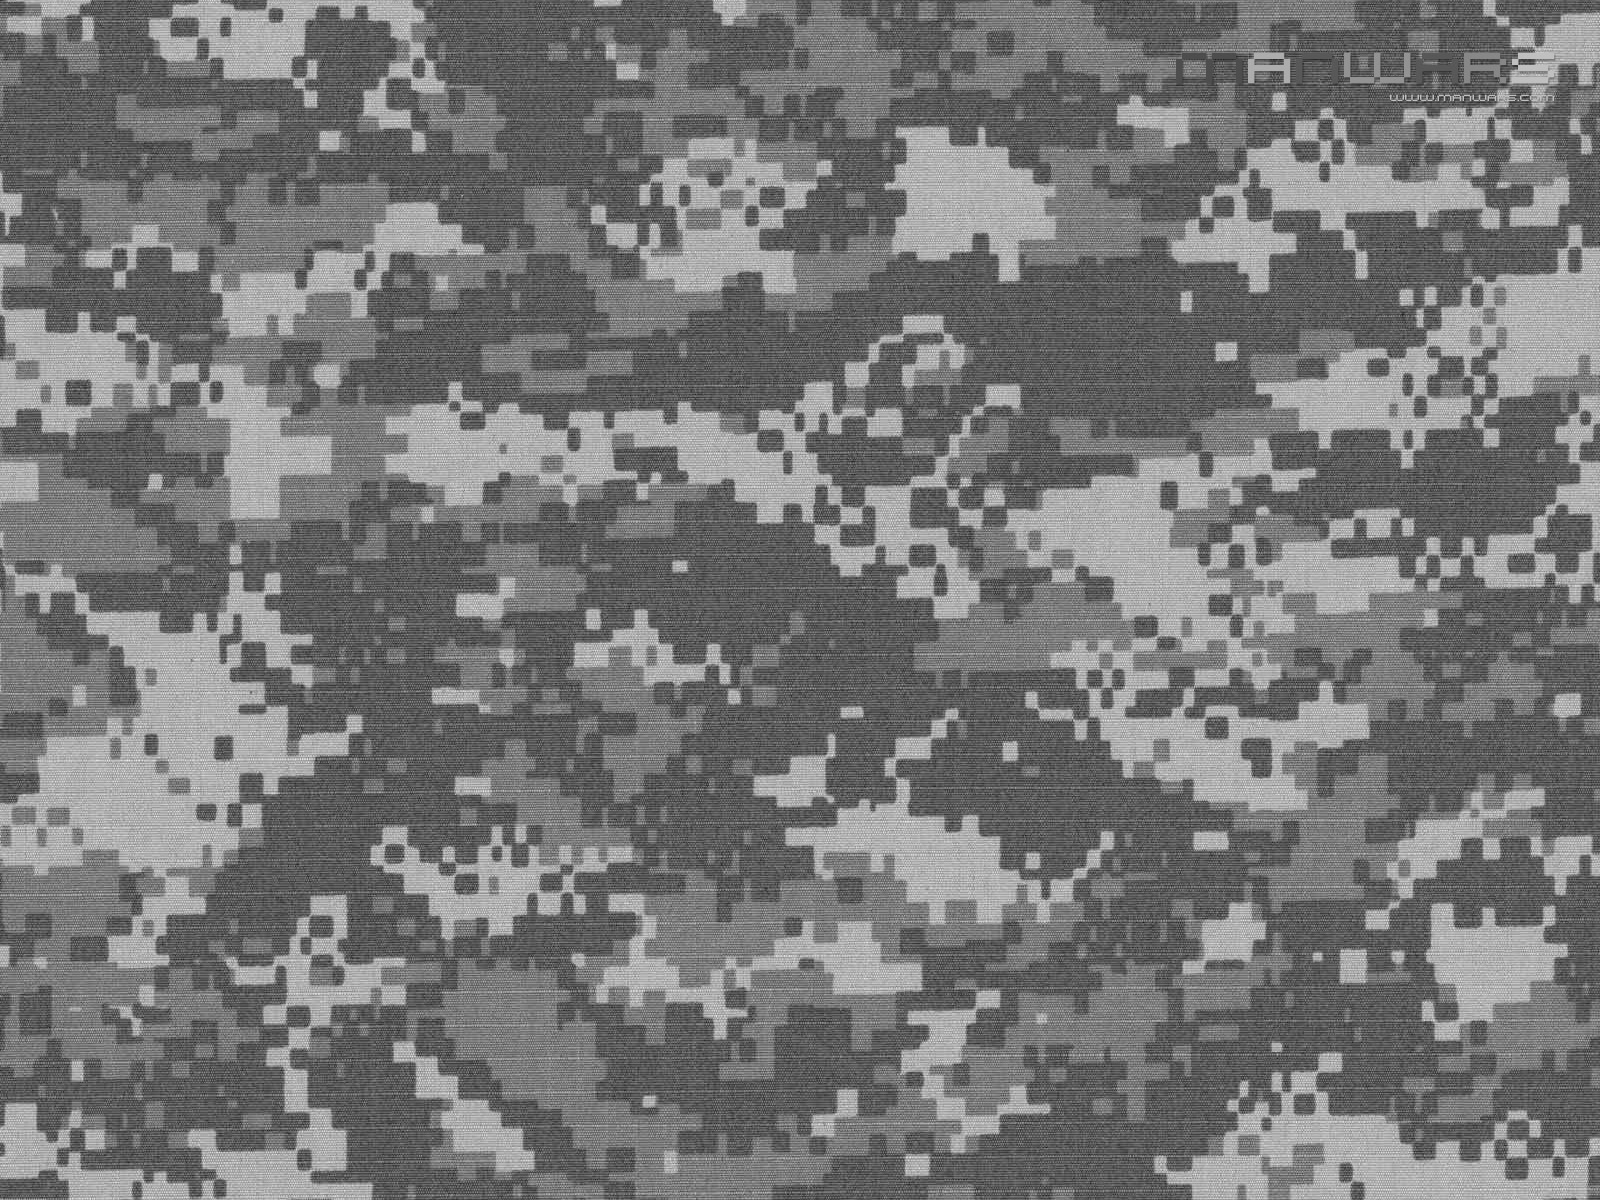 Camouflage Wallpaper 1600x1200 Camouflage 1600x1200